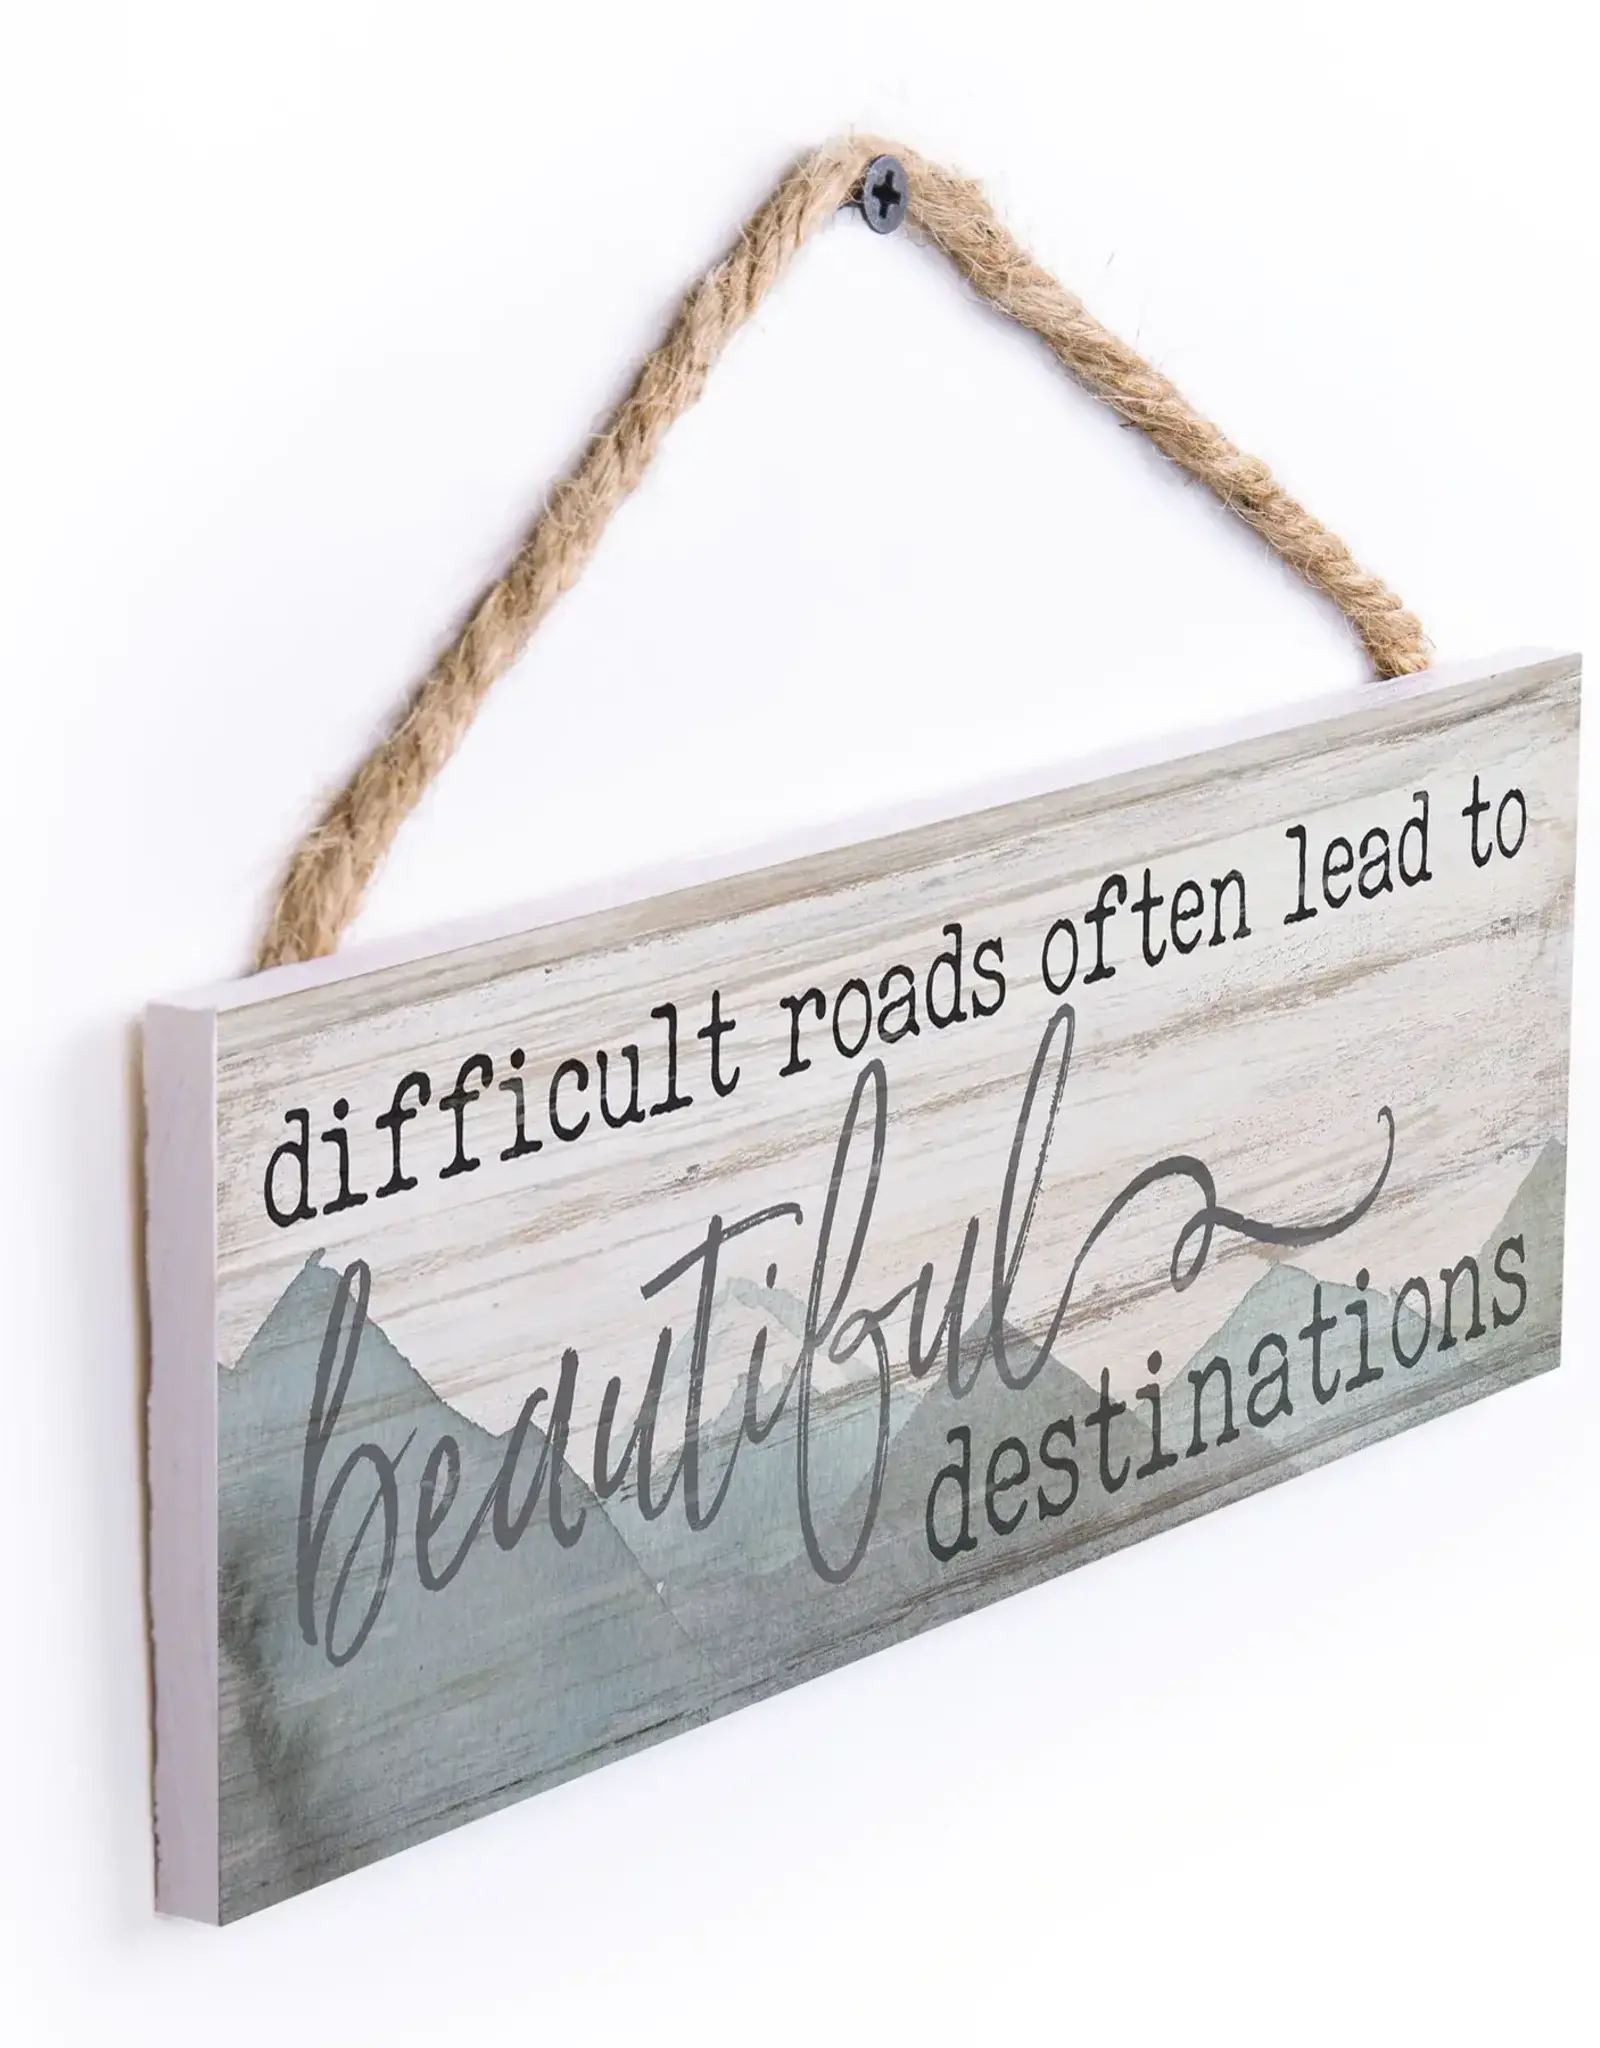 Difficult Roads Often Lead to Beautiful Destinations Wooden Western Sign